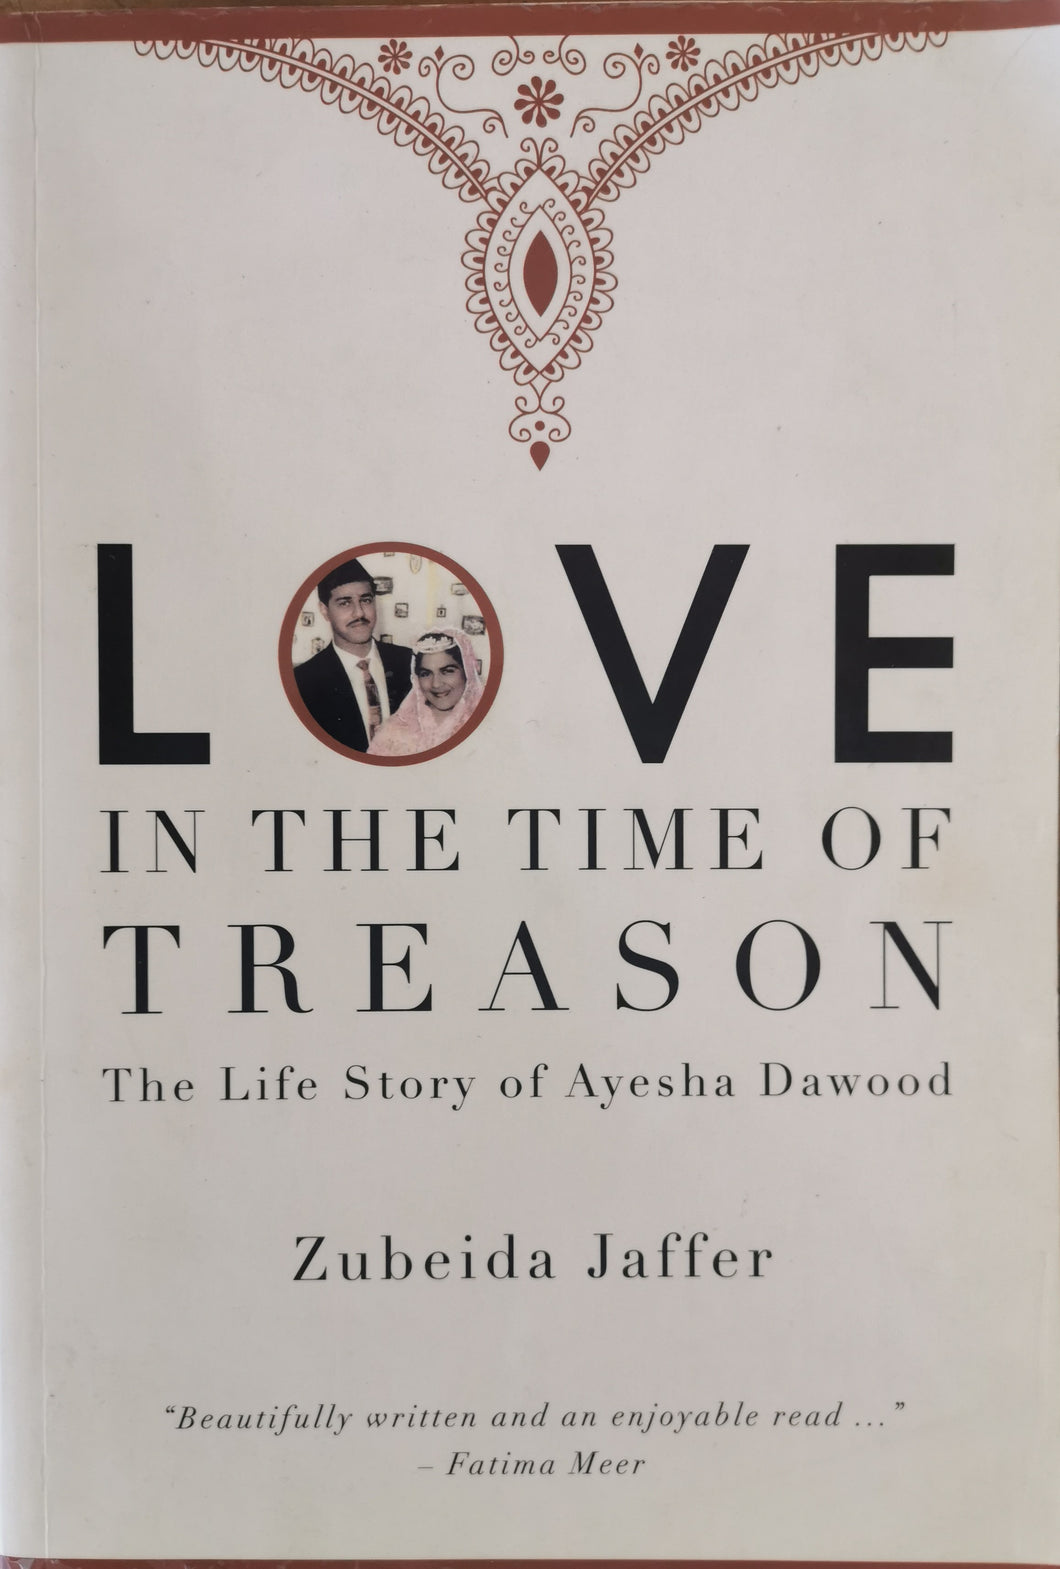 Love in the Time of Treason: The Life Story of Ayesha Dawood by Zubeida Jaffer